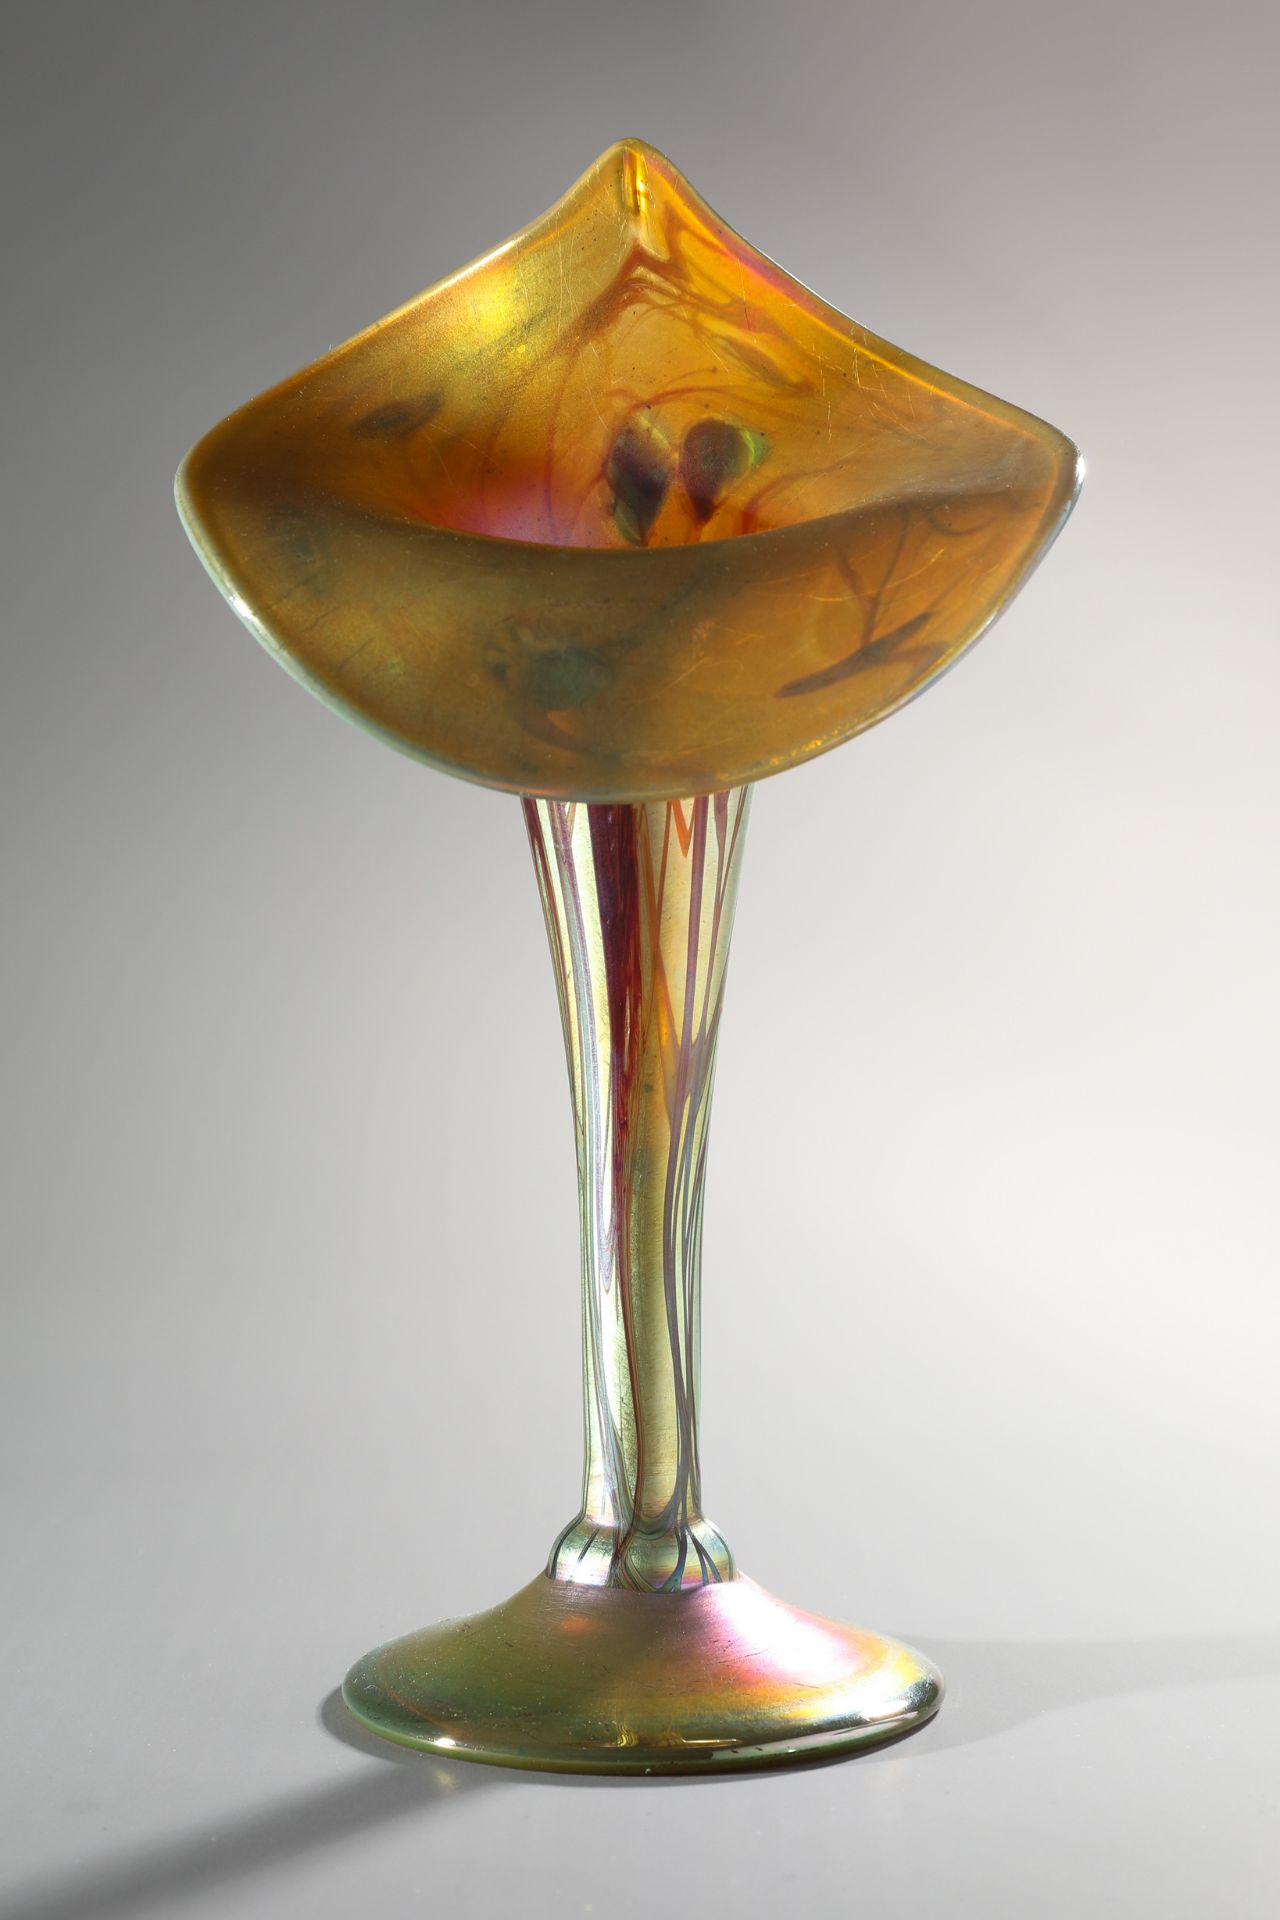 Louis C. Tiffany, Favrile flower cup, around 1904 - Image 3 of 7